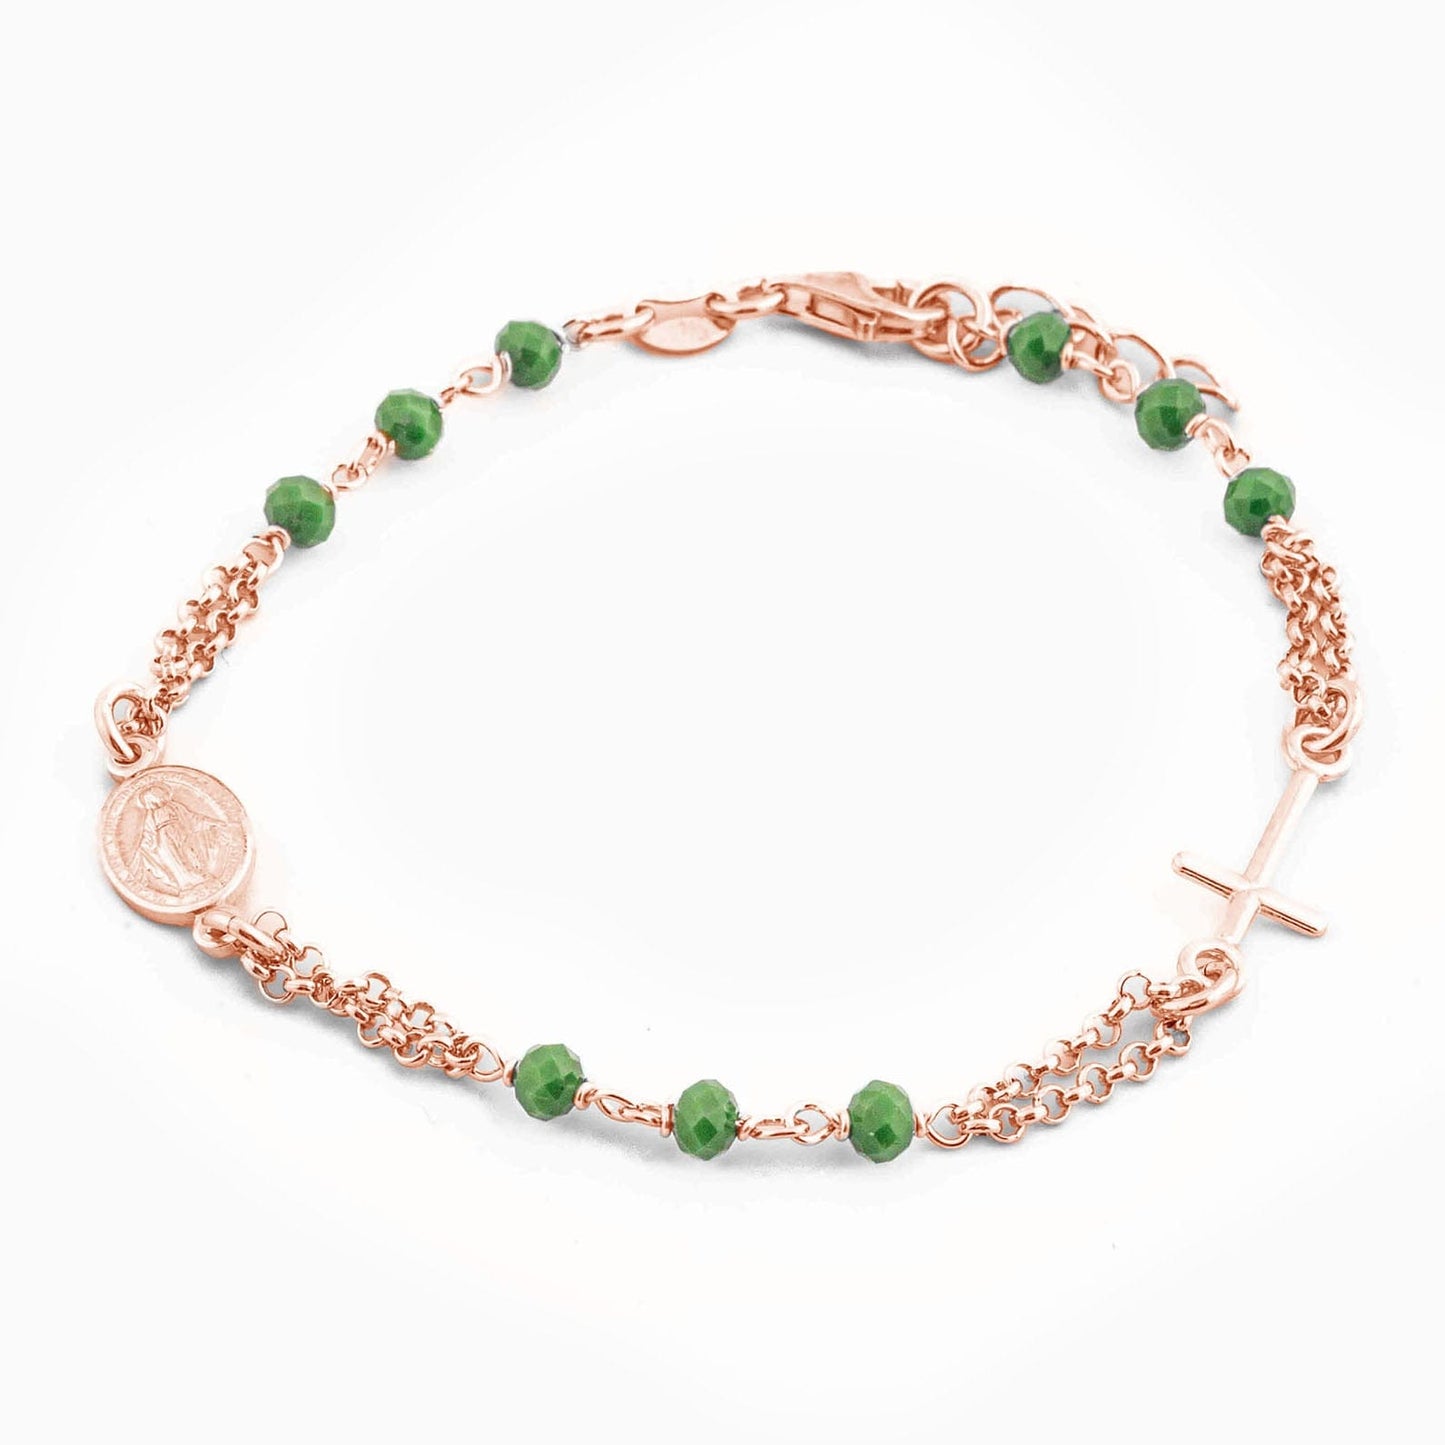 MONDO CATTOLICO Prayer Beads Rose Gold / Cm 17.5 (6.9 in) / Cm 3 (1.2 in) STERLING SILVER ROSARY BRACELET DOUBLE CHAIN GREEN FACETED BEADS